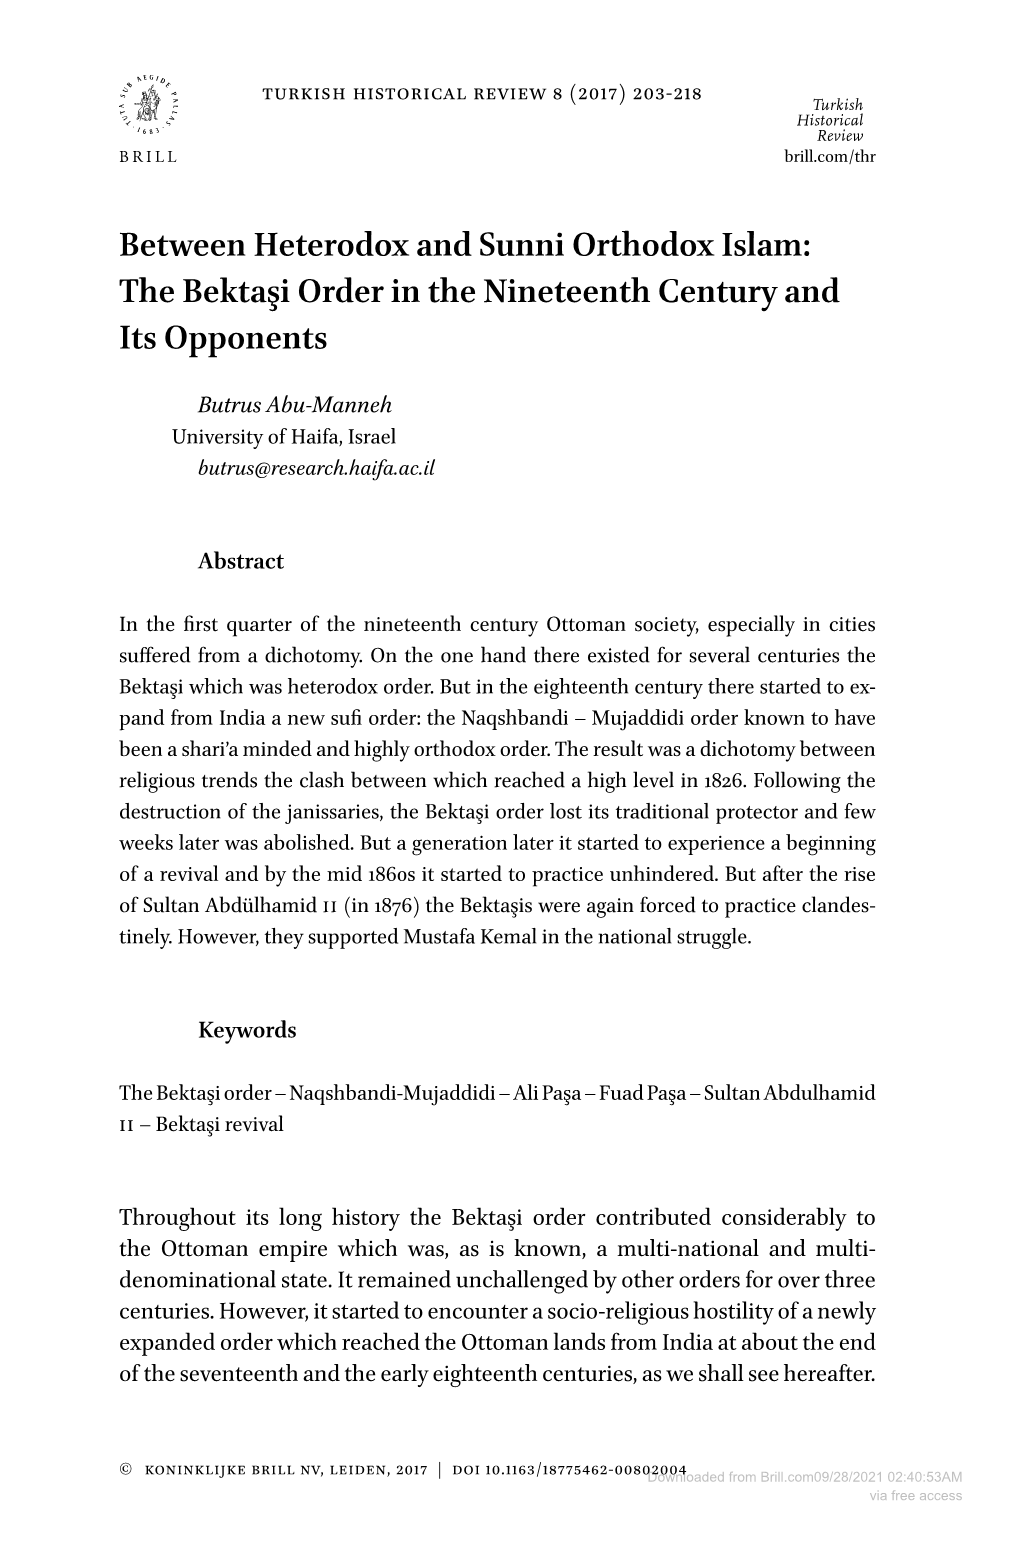 Between Heterodox and Sunni Orthodox Islam: the Bektaşi Order in the Nineteenth Century and Its Opponents